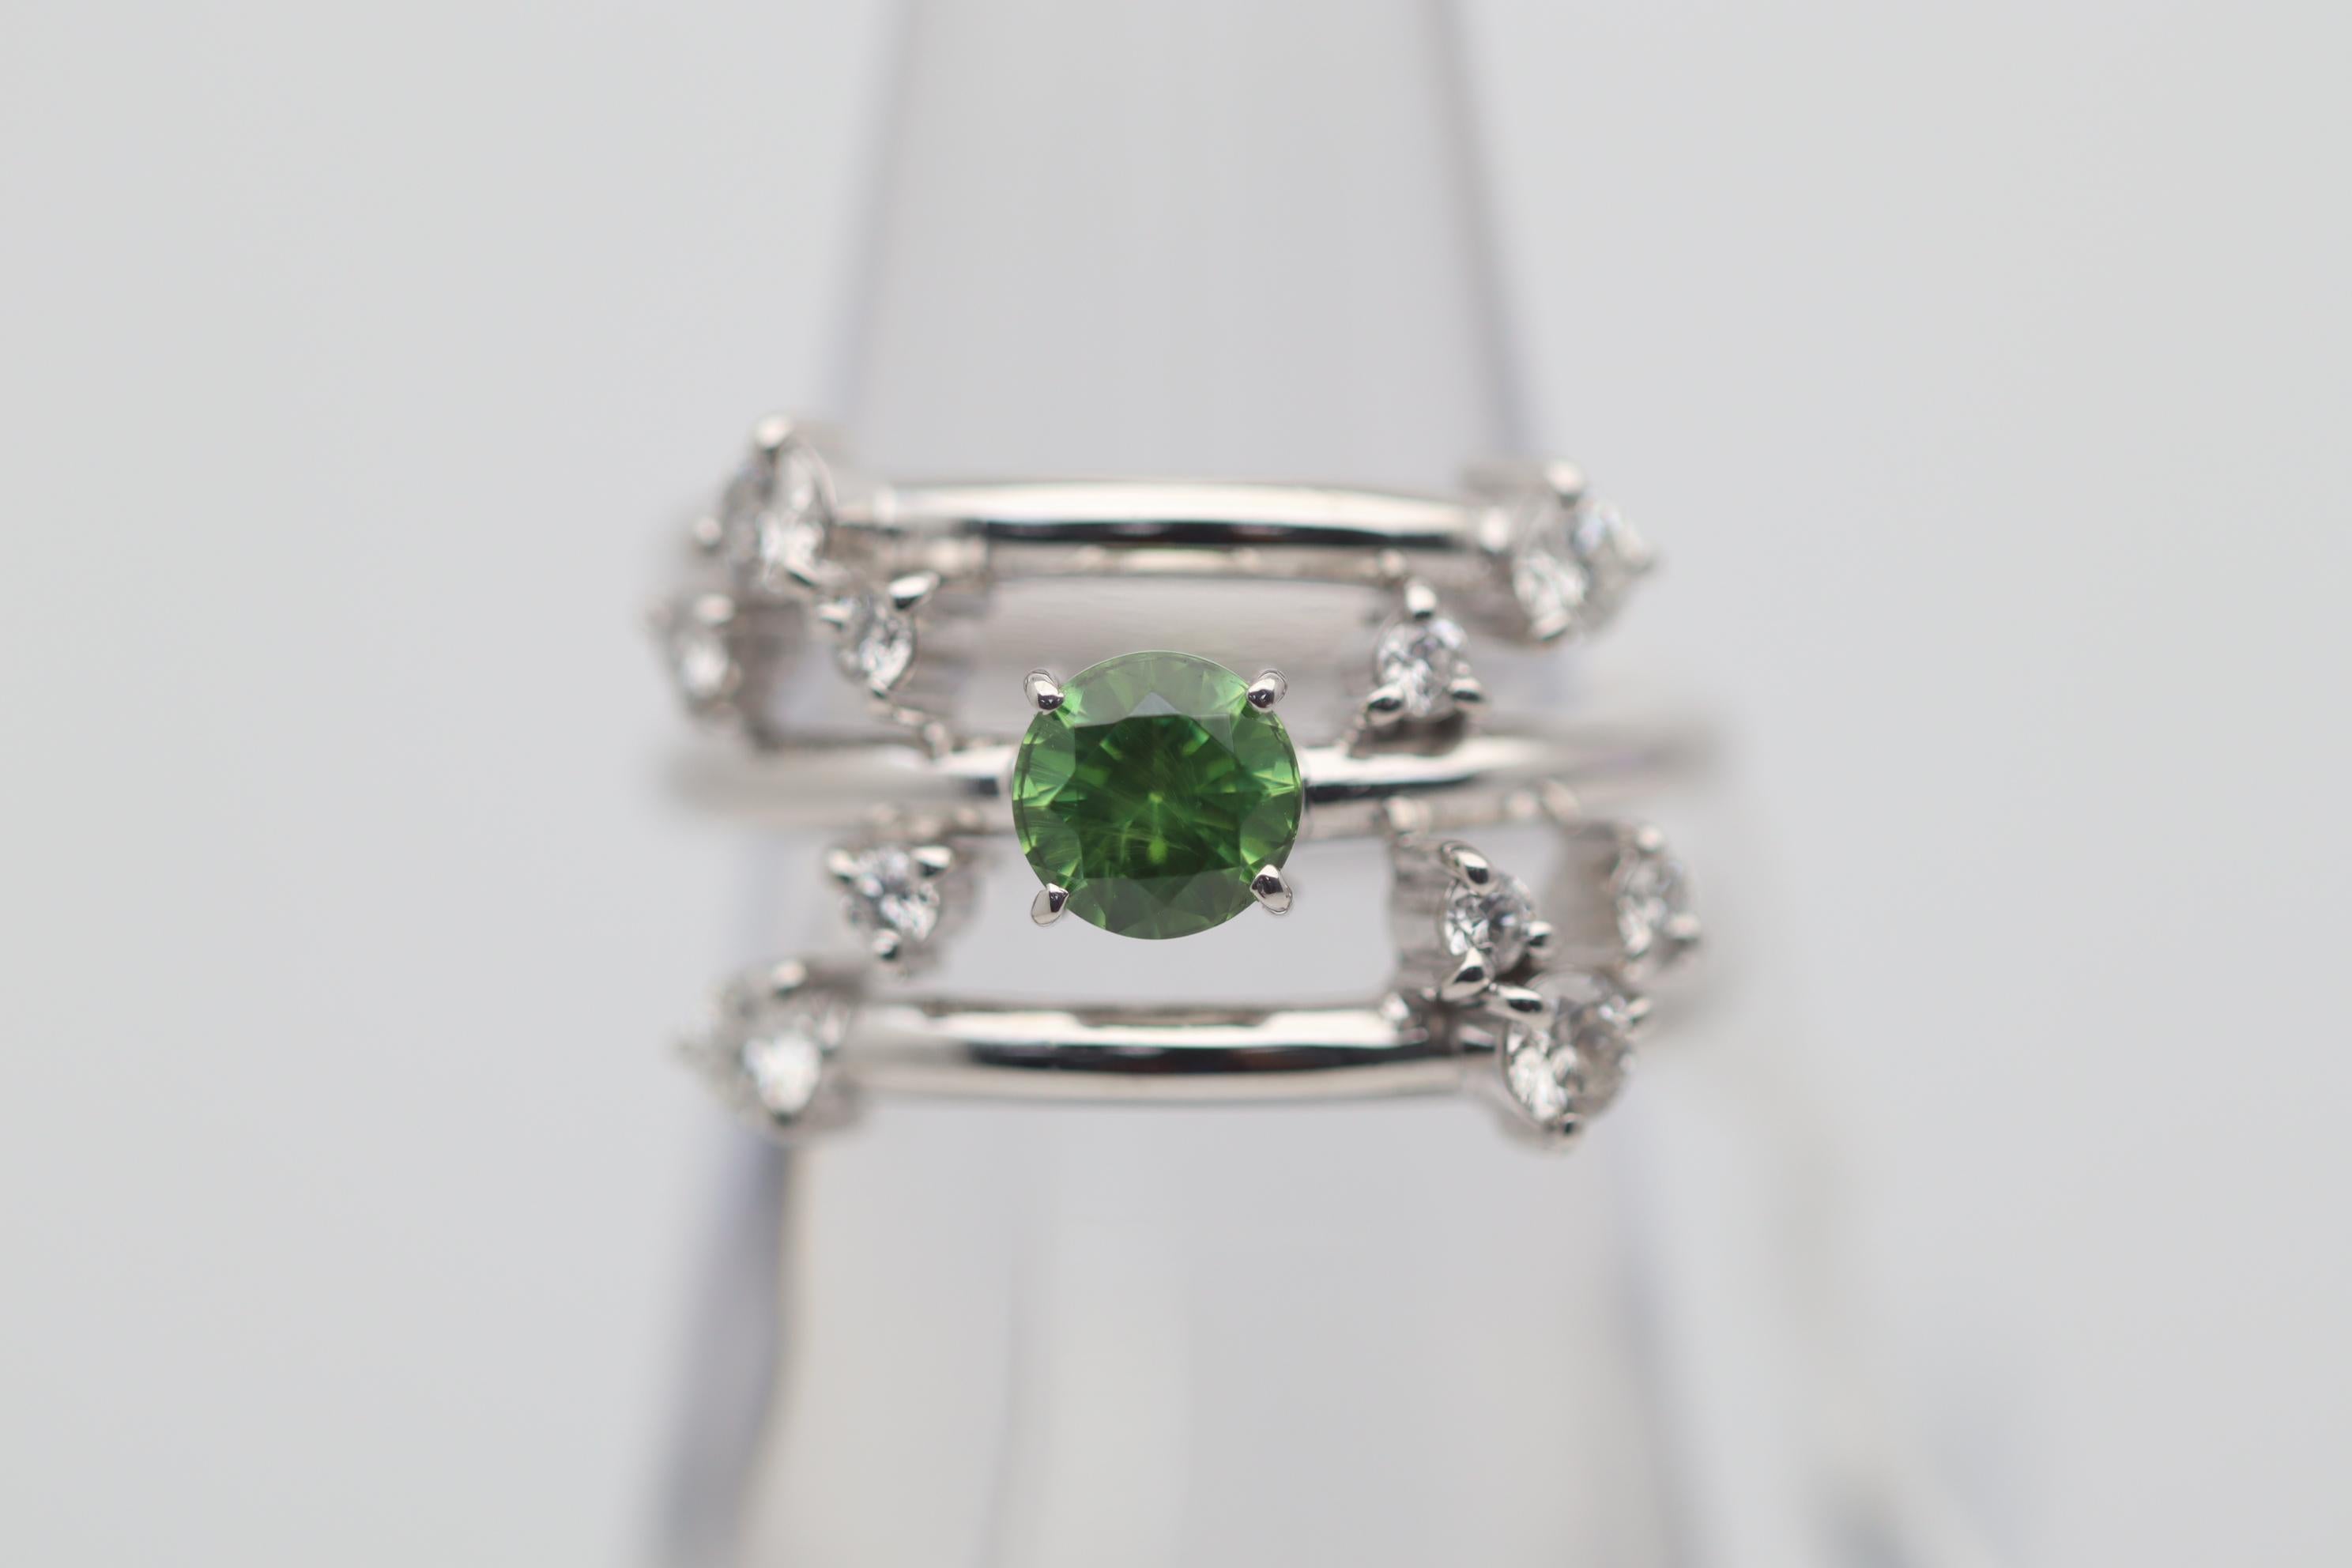 A fun and stylish spiral styled ring featuring a 0.66 carat demantoid garnet. It has a bright clean brilliant green color along with a classic horsetail inclusion confirming its Russian origin. It is accented by 10 round brilliant-cut diamonds set